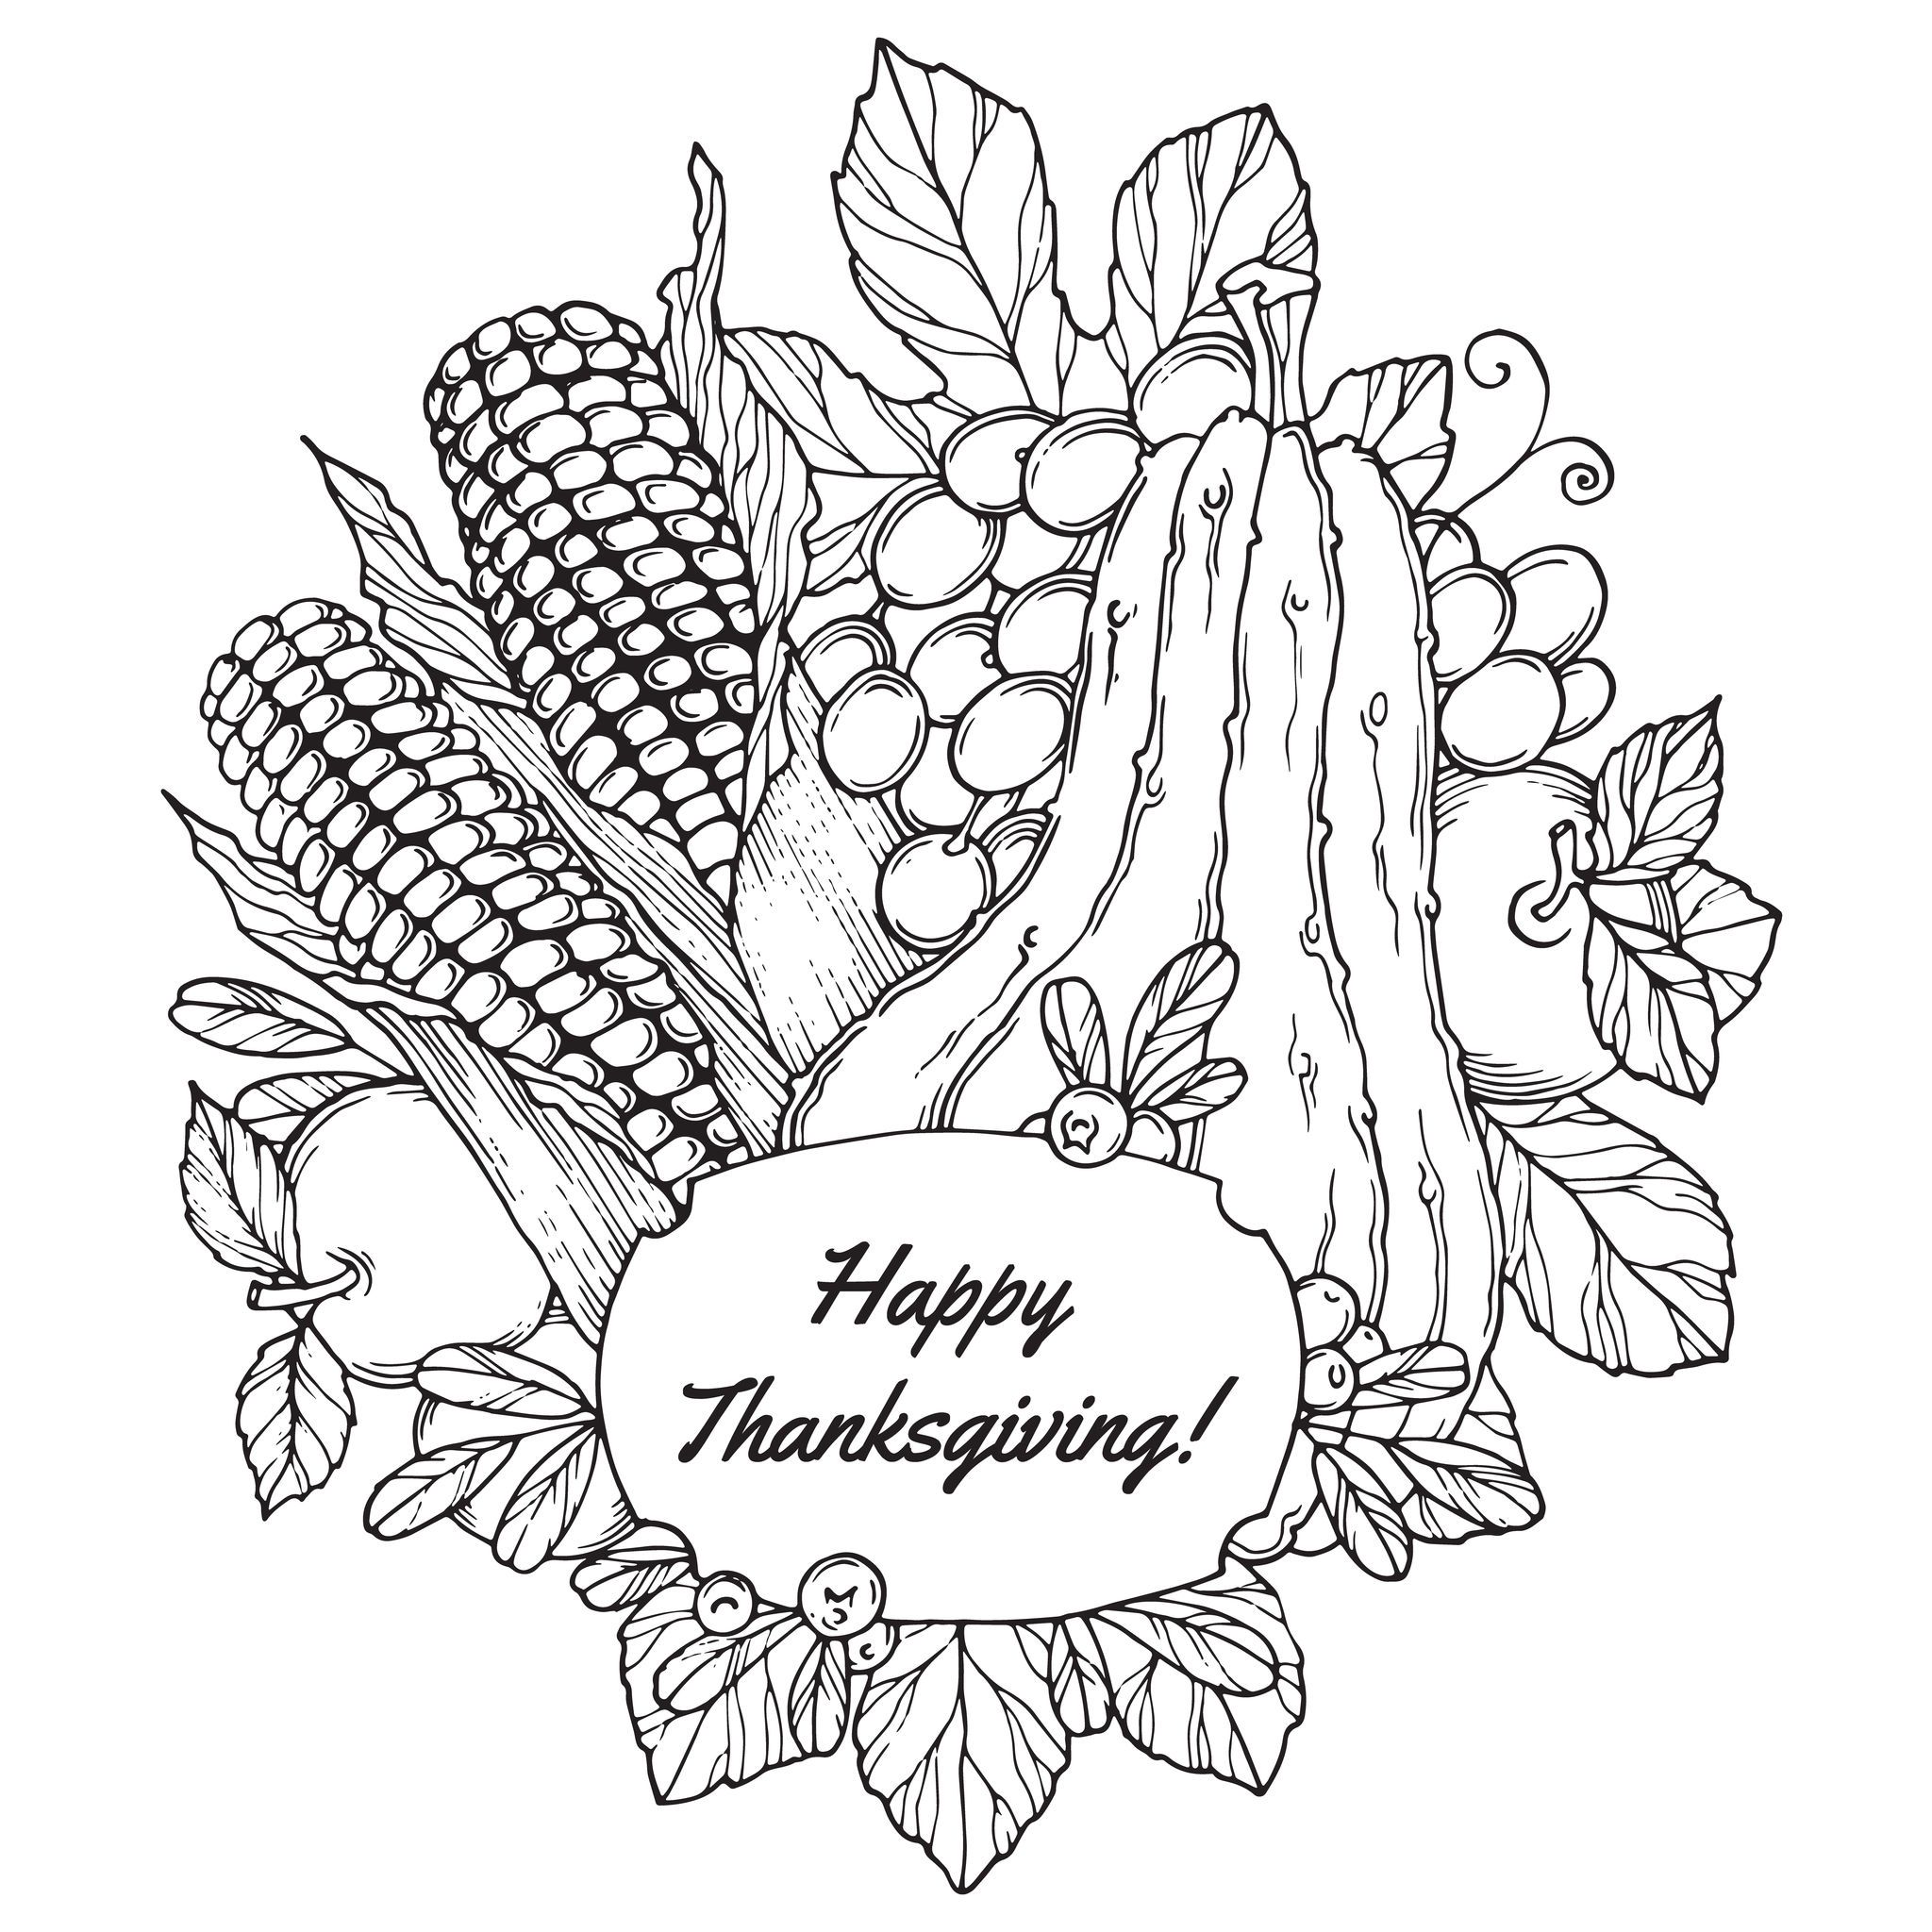 Happy Thanksgiving Coloring Pages Best Coloring Pages For Kids